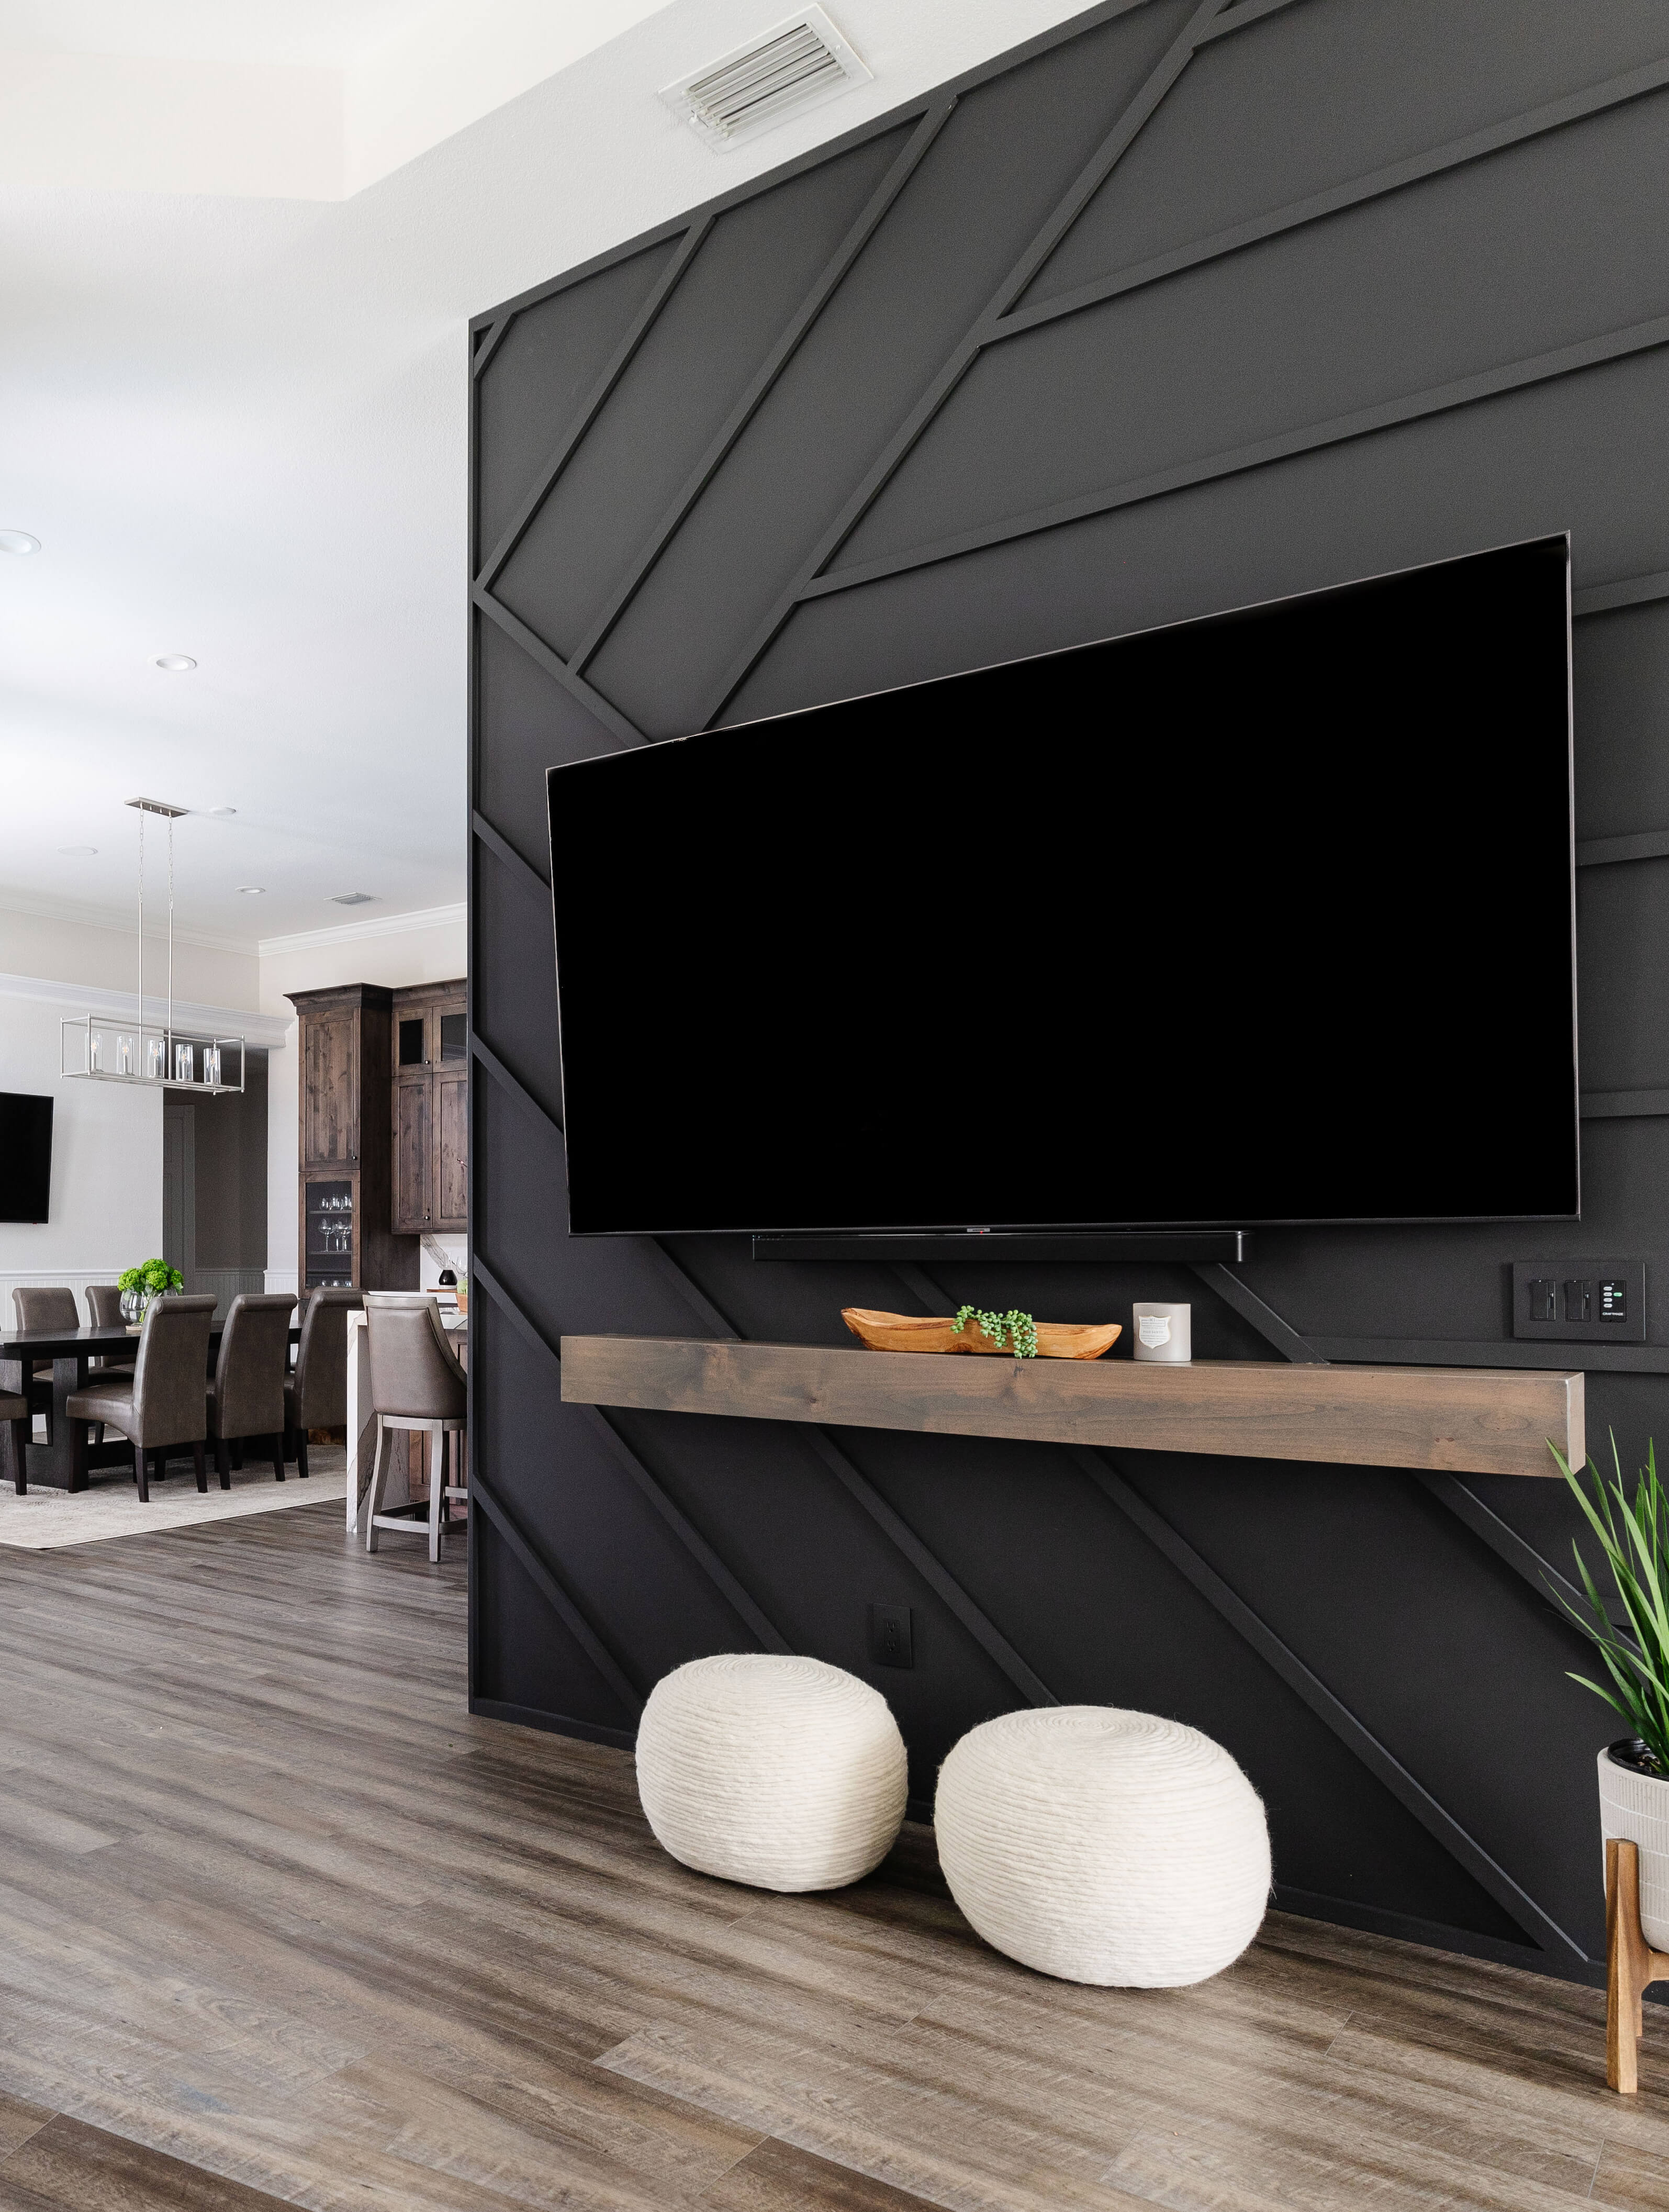 The TV wall was transformed into an accent wall with black painted boards in a fun, modern pattern.